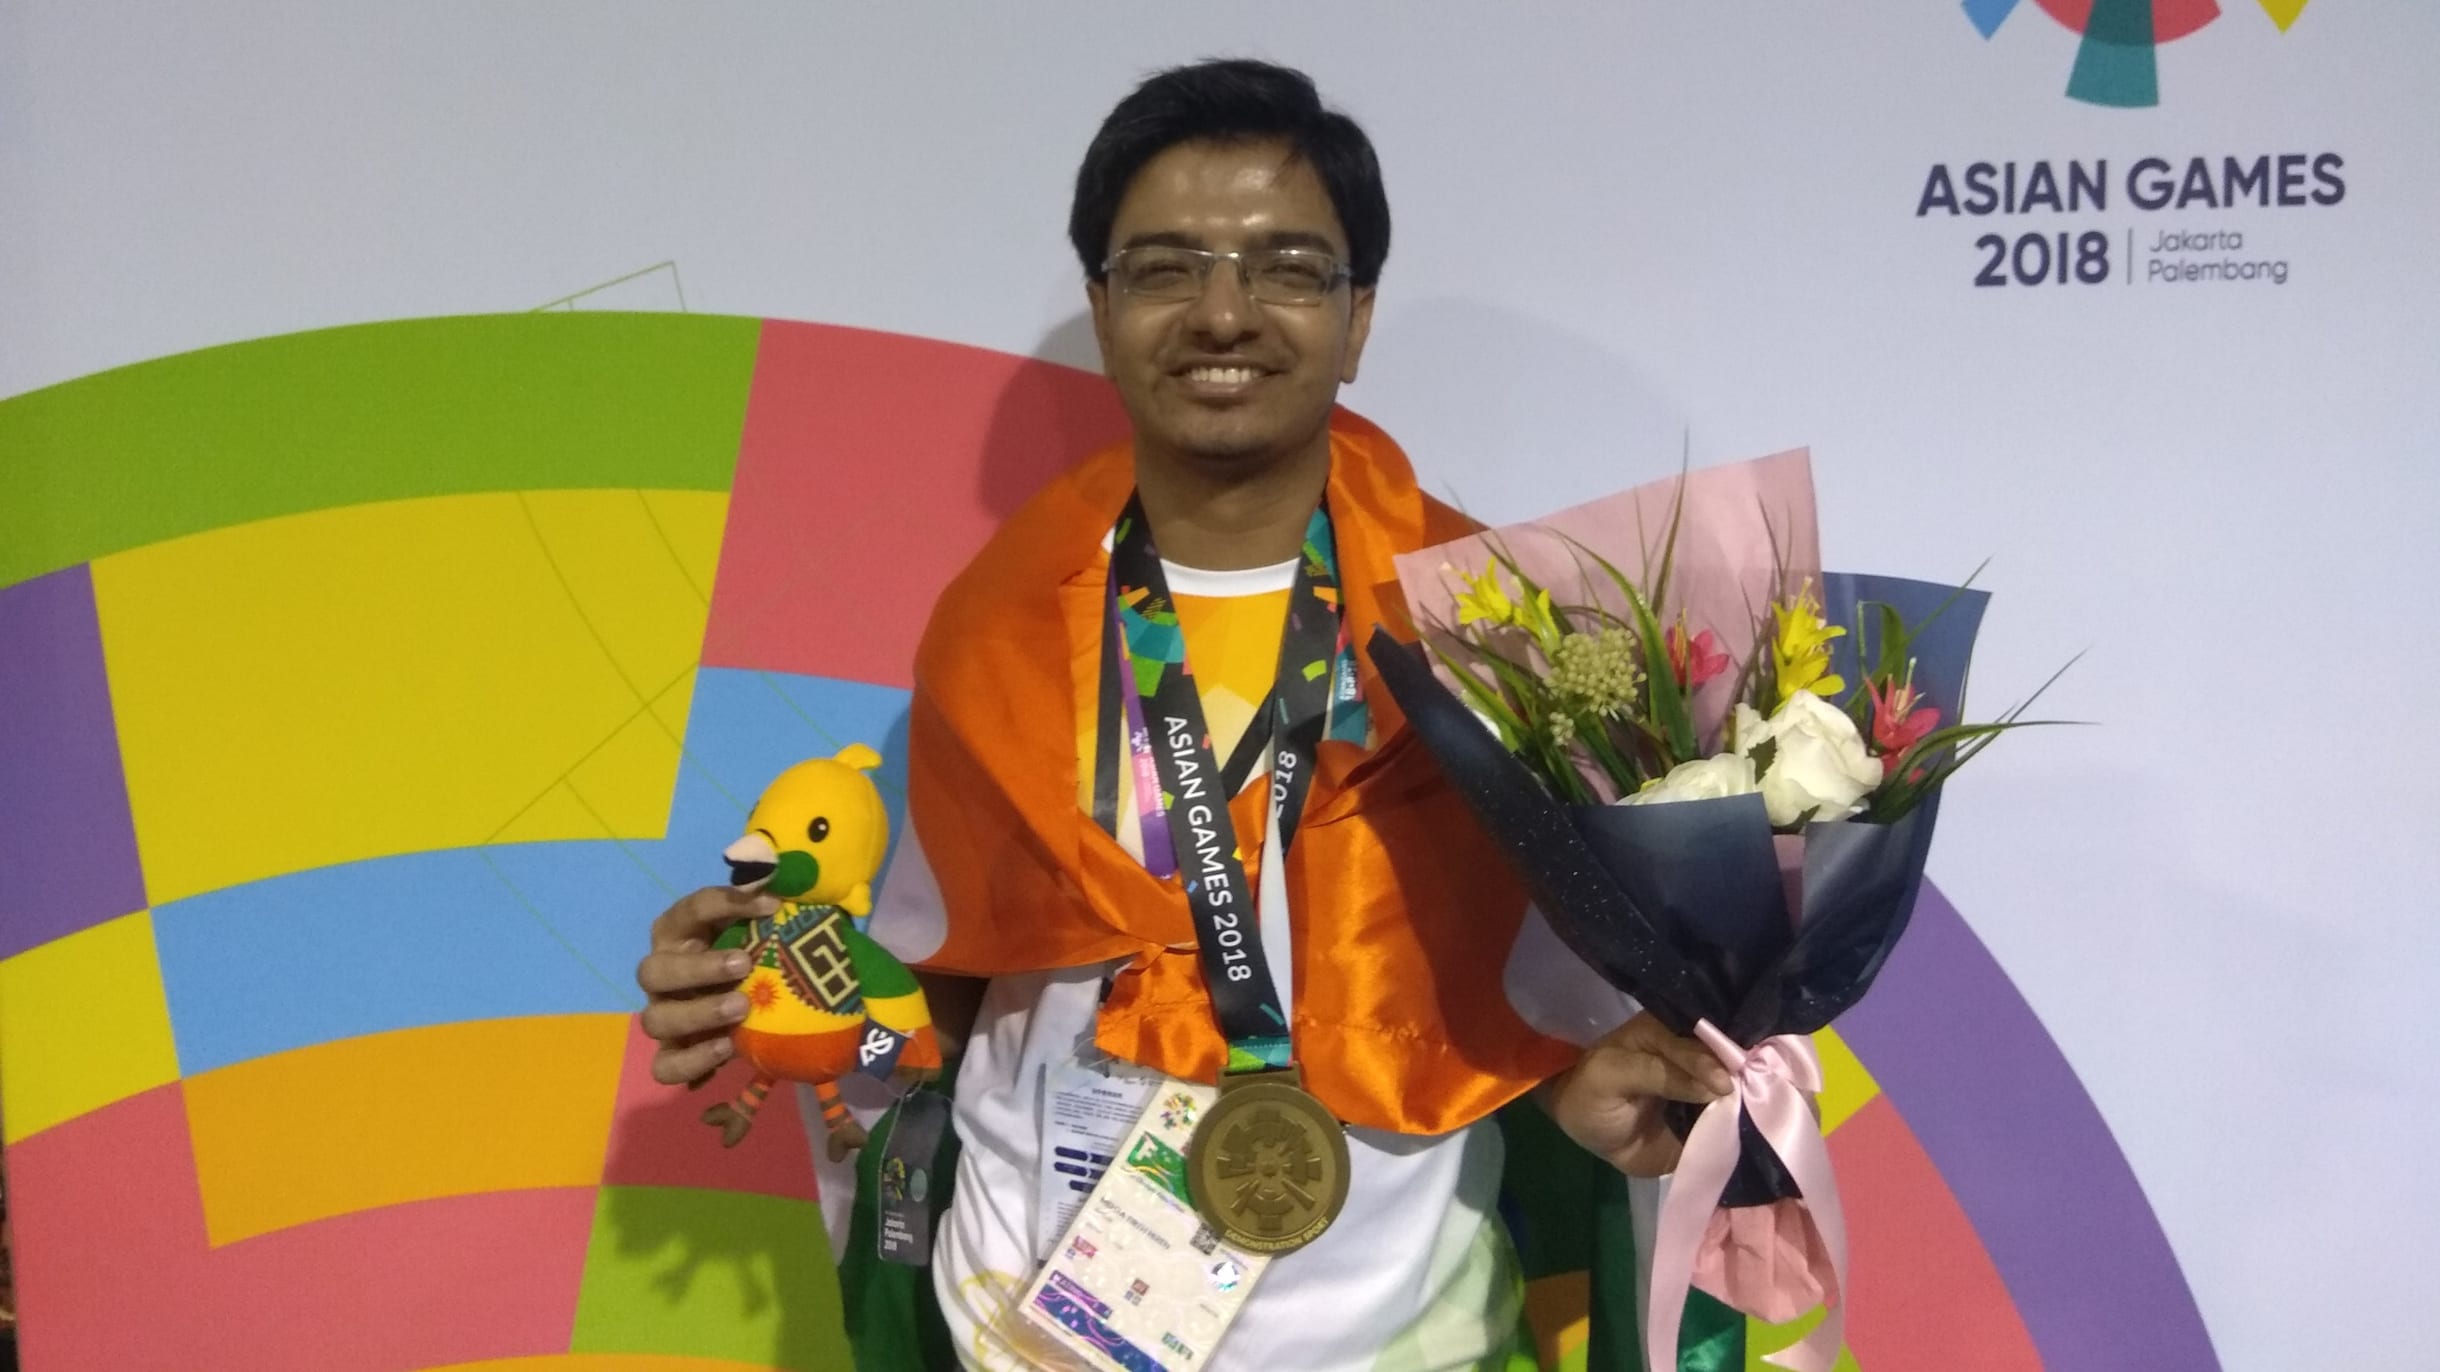 Esports can help other sports: Asian Games medallist gamer Tirth Mehta